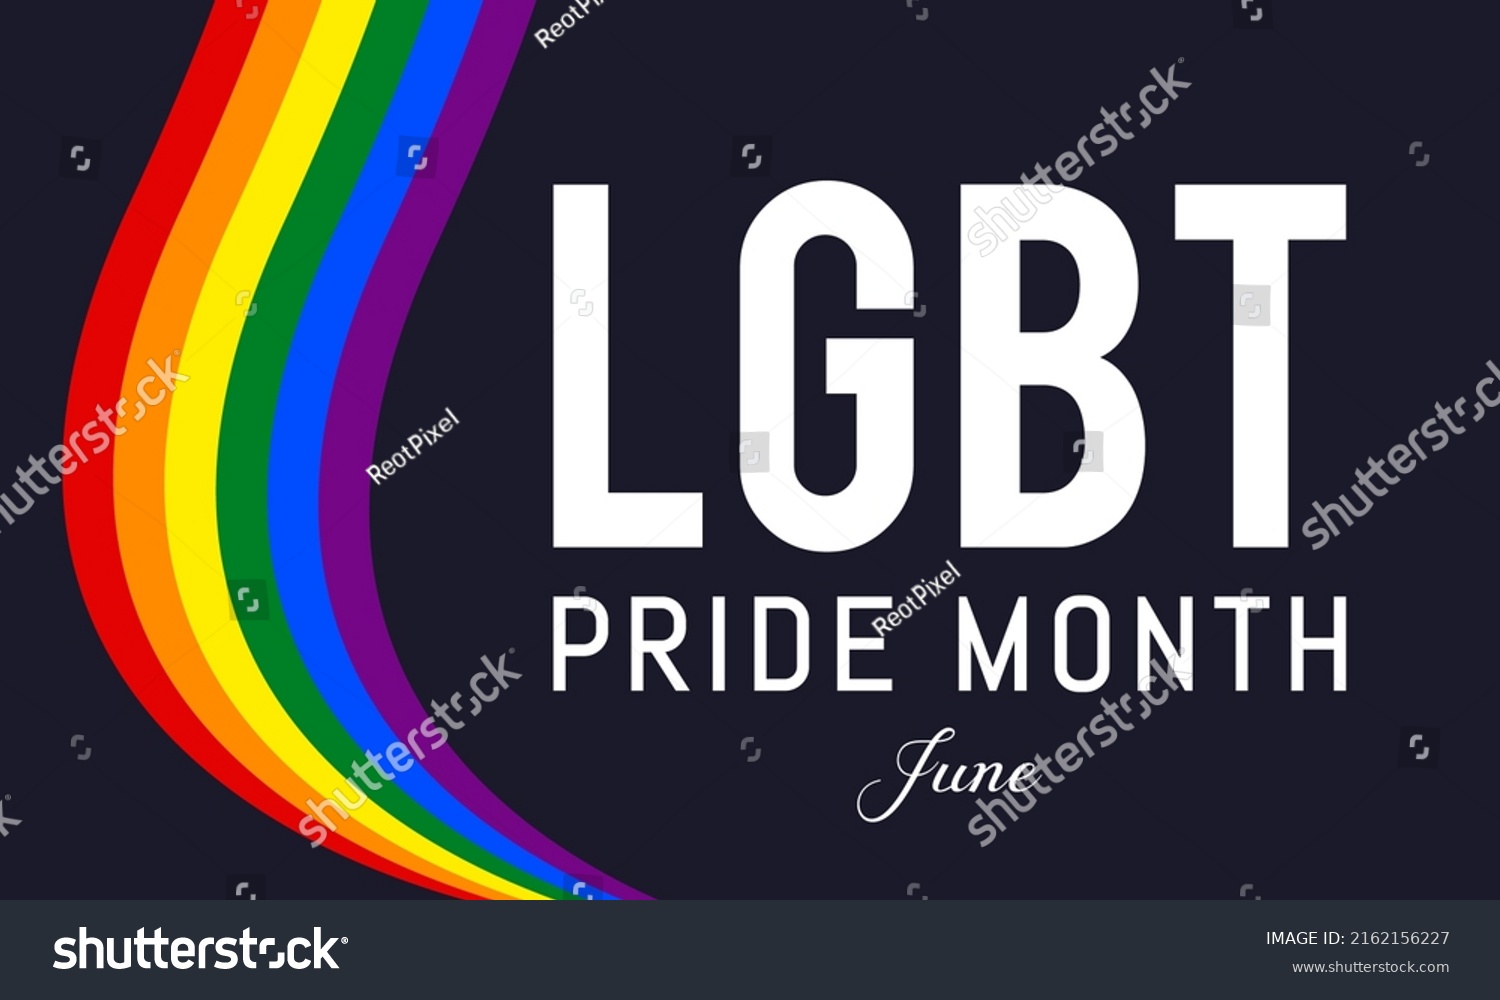 Lgbtq Pride Month June Every Year Stock Vector (Royalty Free